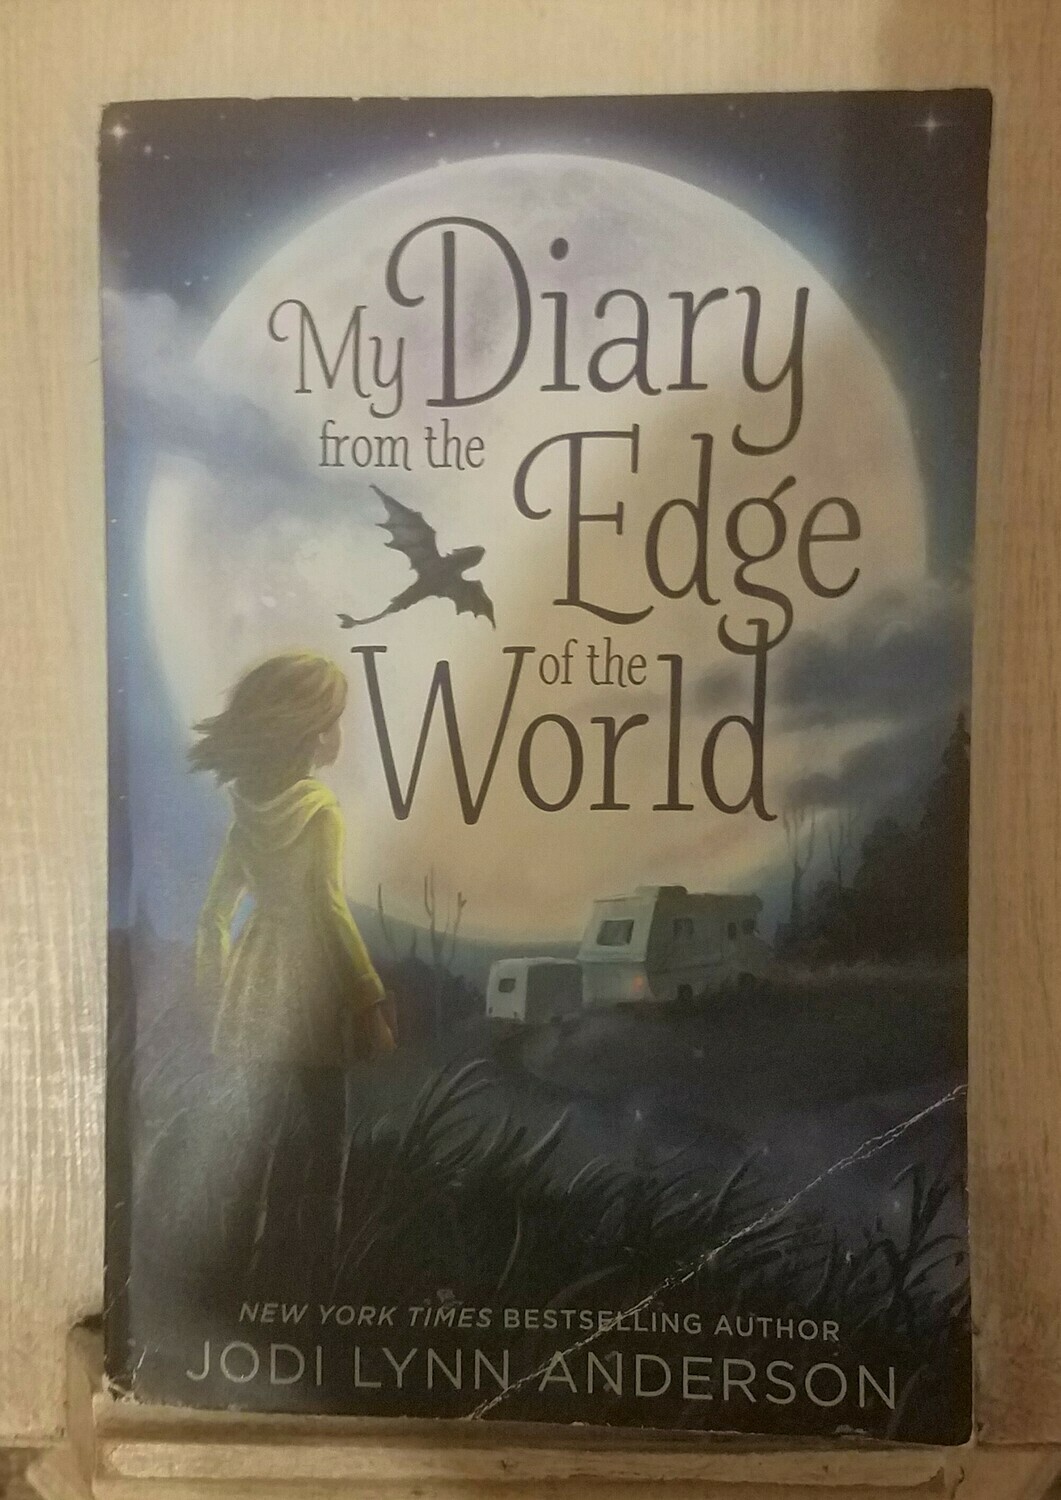 My Diary from the Edge of the World by Jodi Lynn Anderson